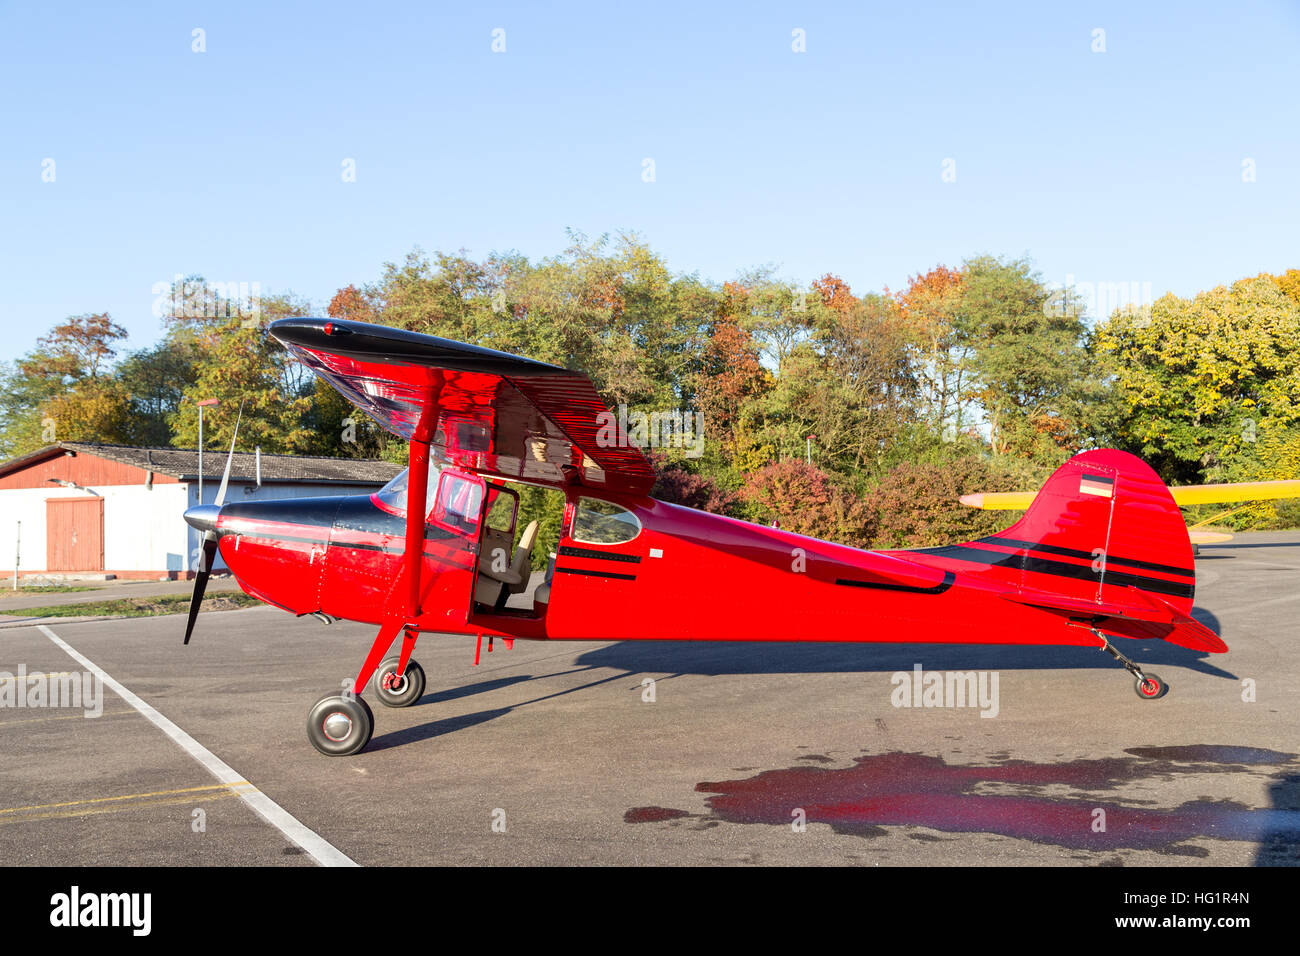 Bremgarten, Germany - October 22, 2016: A classic red Cessna 170 aircraft parked at the airport Stock Photo